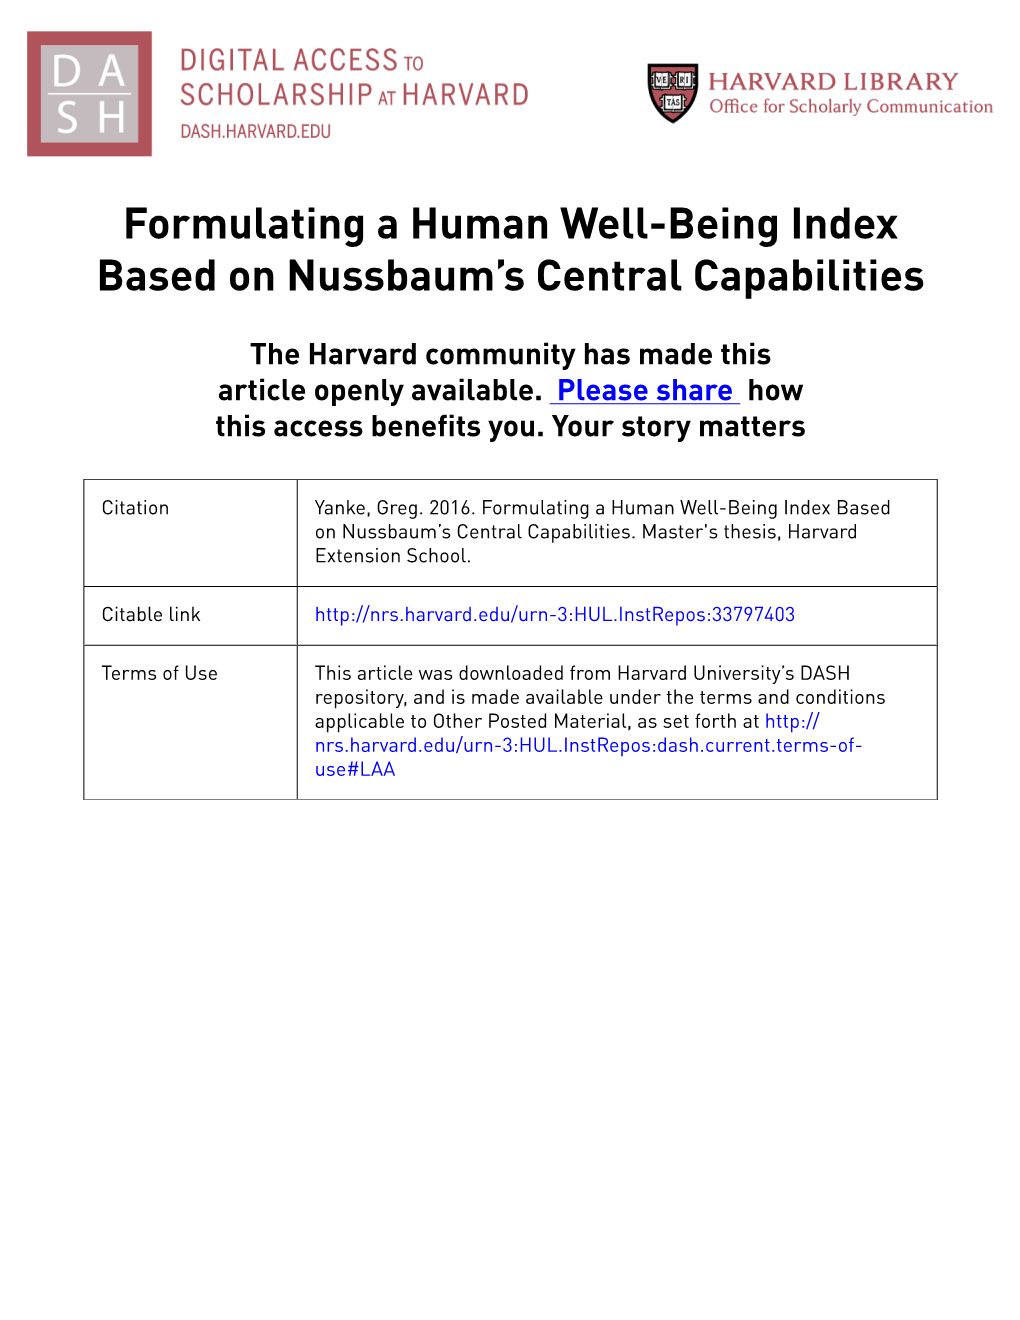 Formulating a Human Well-Being Index Based on Nussbaum's Central Capabilities